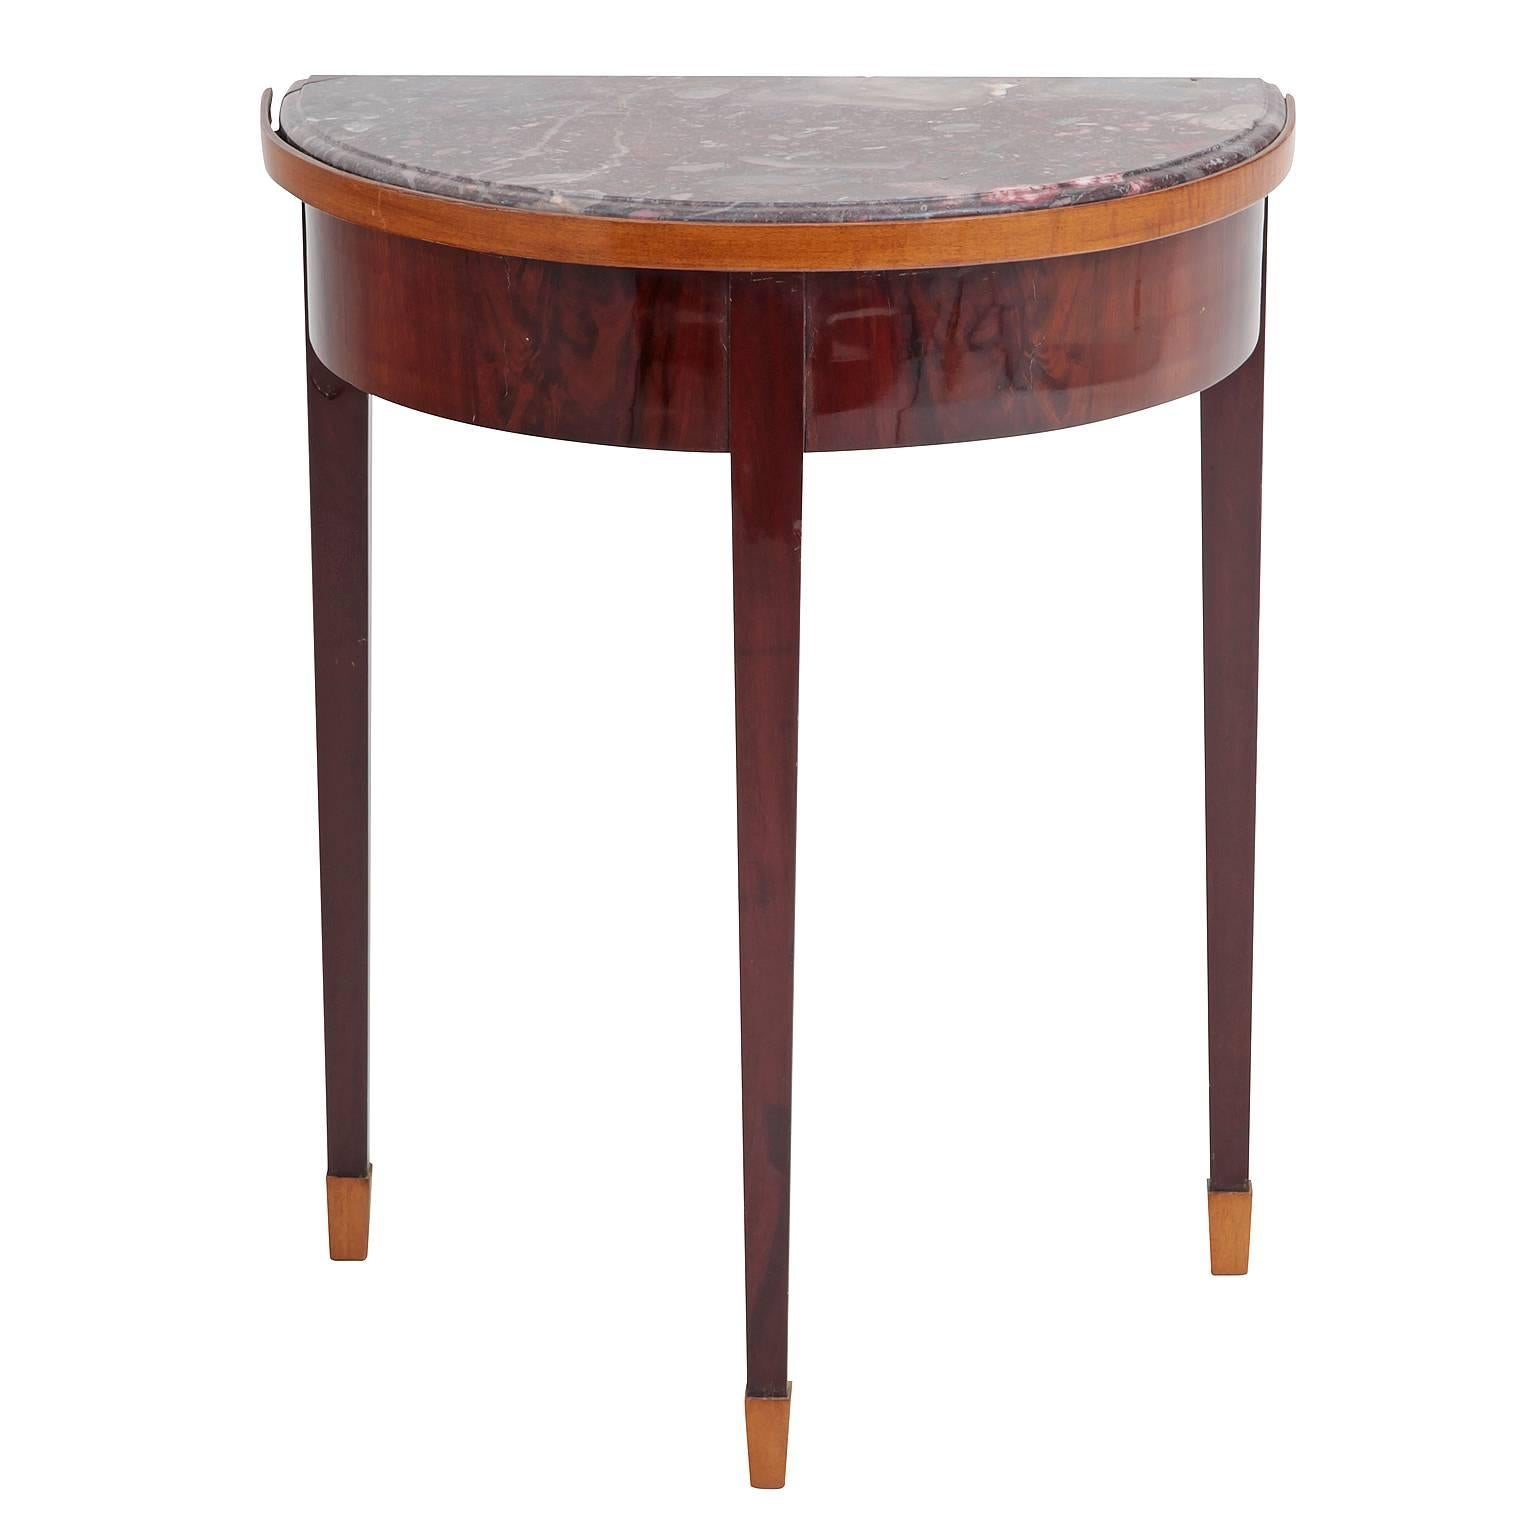 This console stands on three tapered square feet and has a gorgeous red and white grained marble surface. The edge and feet are accented with lighter woods.